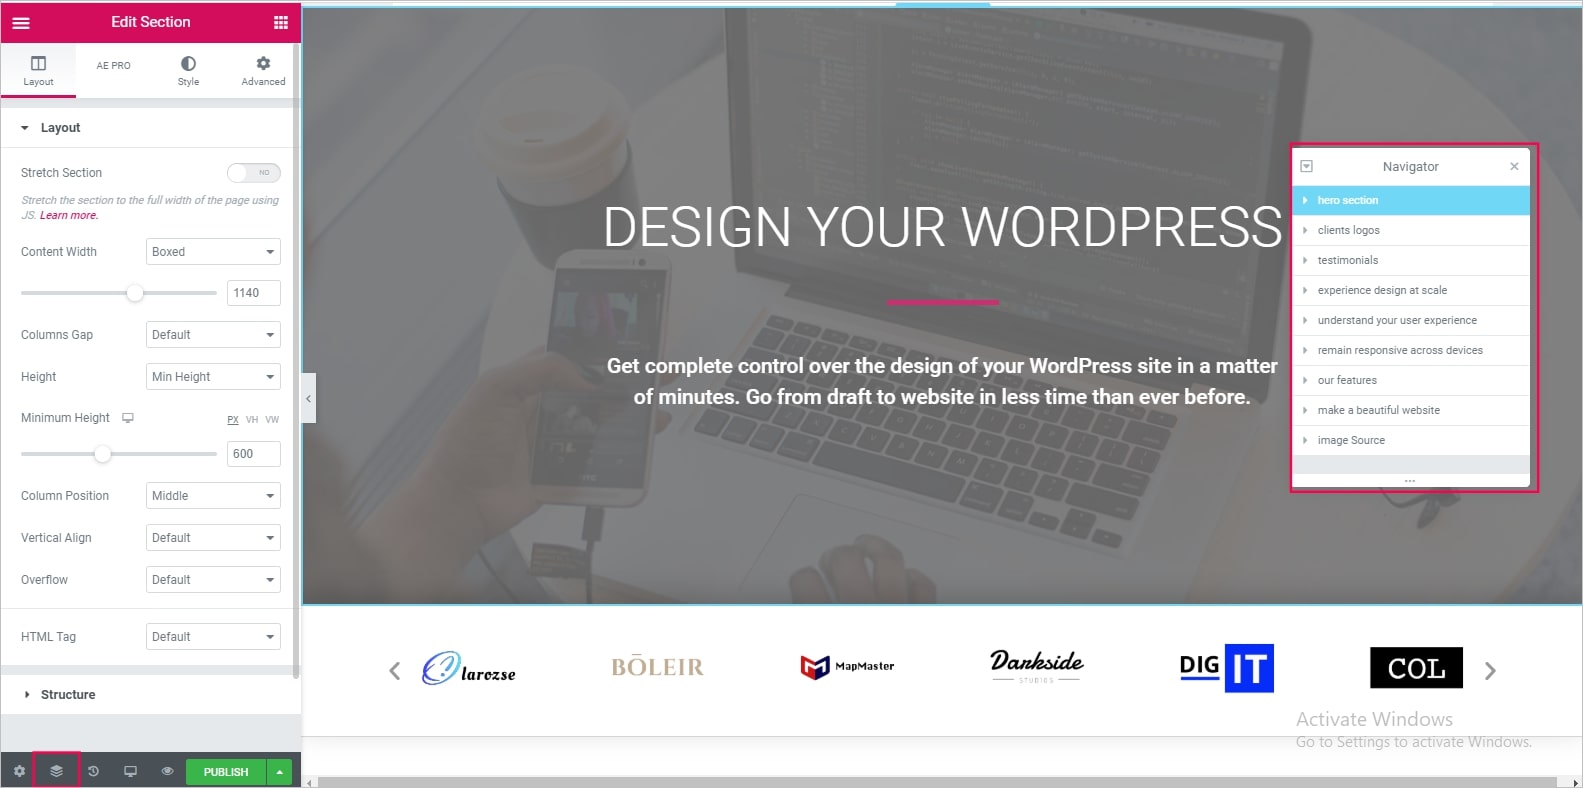 Elementor Review — Wordpress-based Website Builder. Does It Match the Expectations? — 18